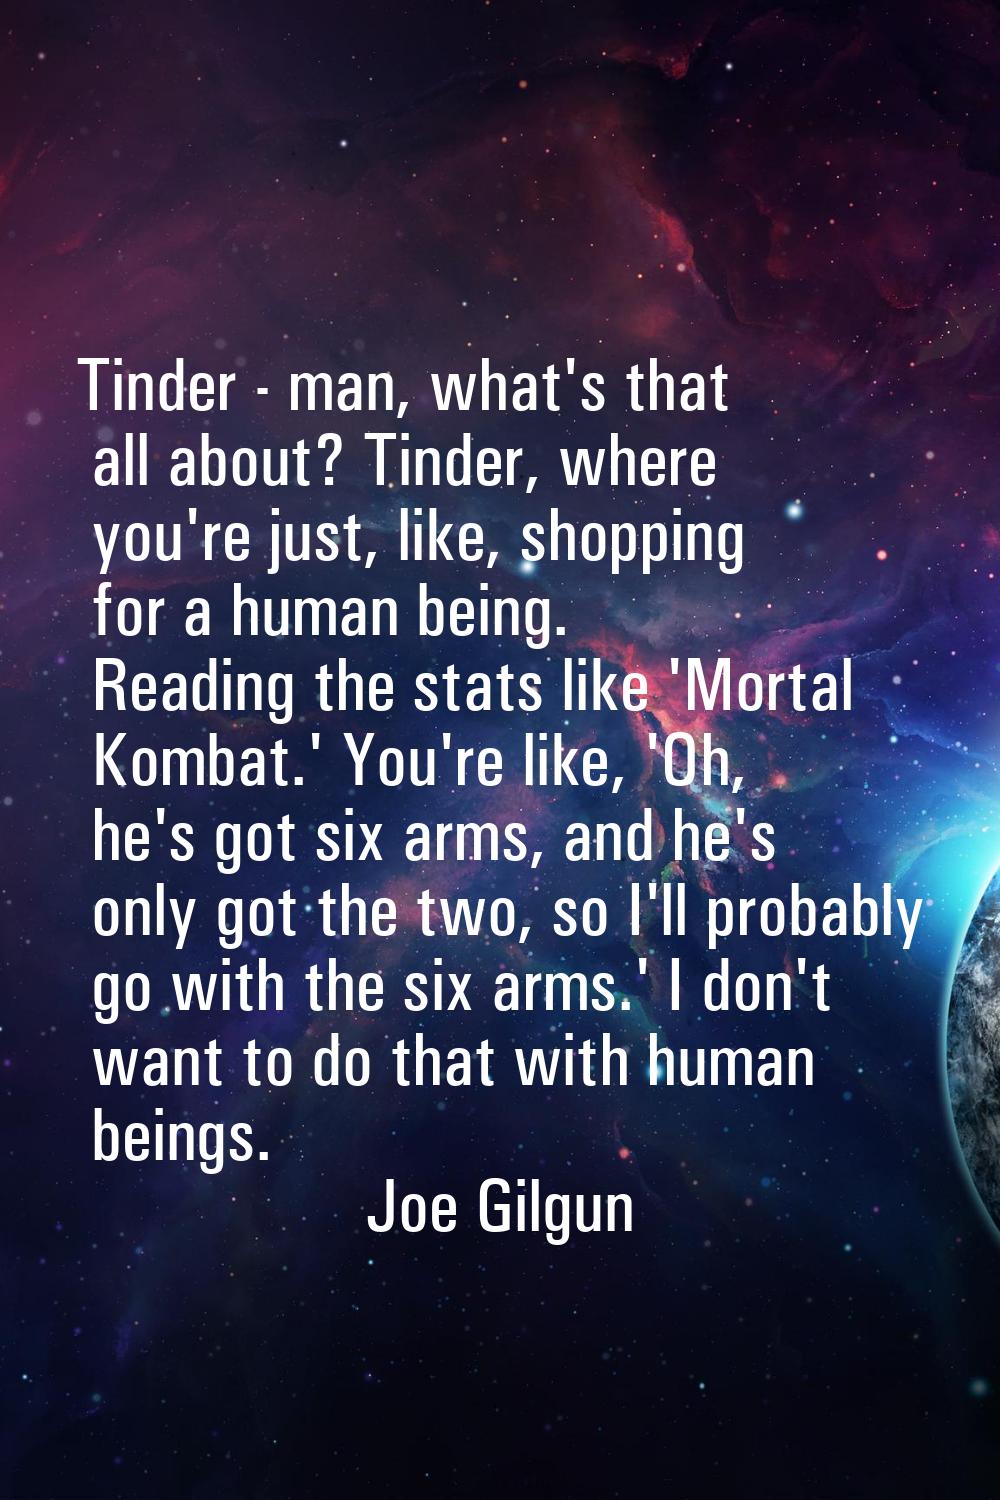 Tinder - man, what's that all about? Tinder, where you're just, like, shopping for a human being. R